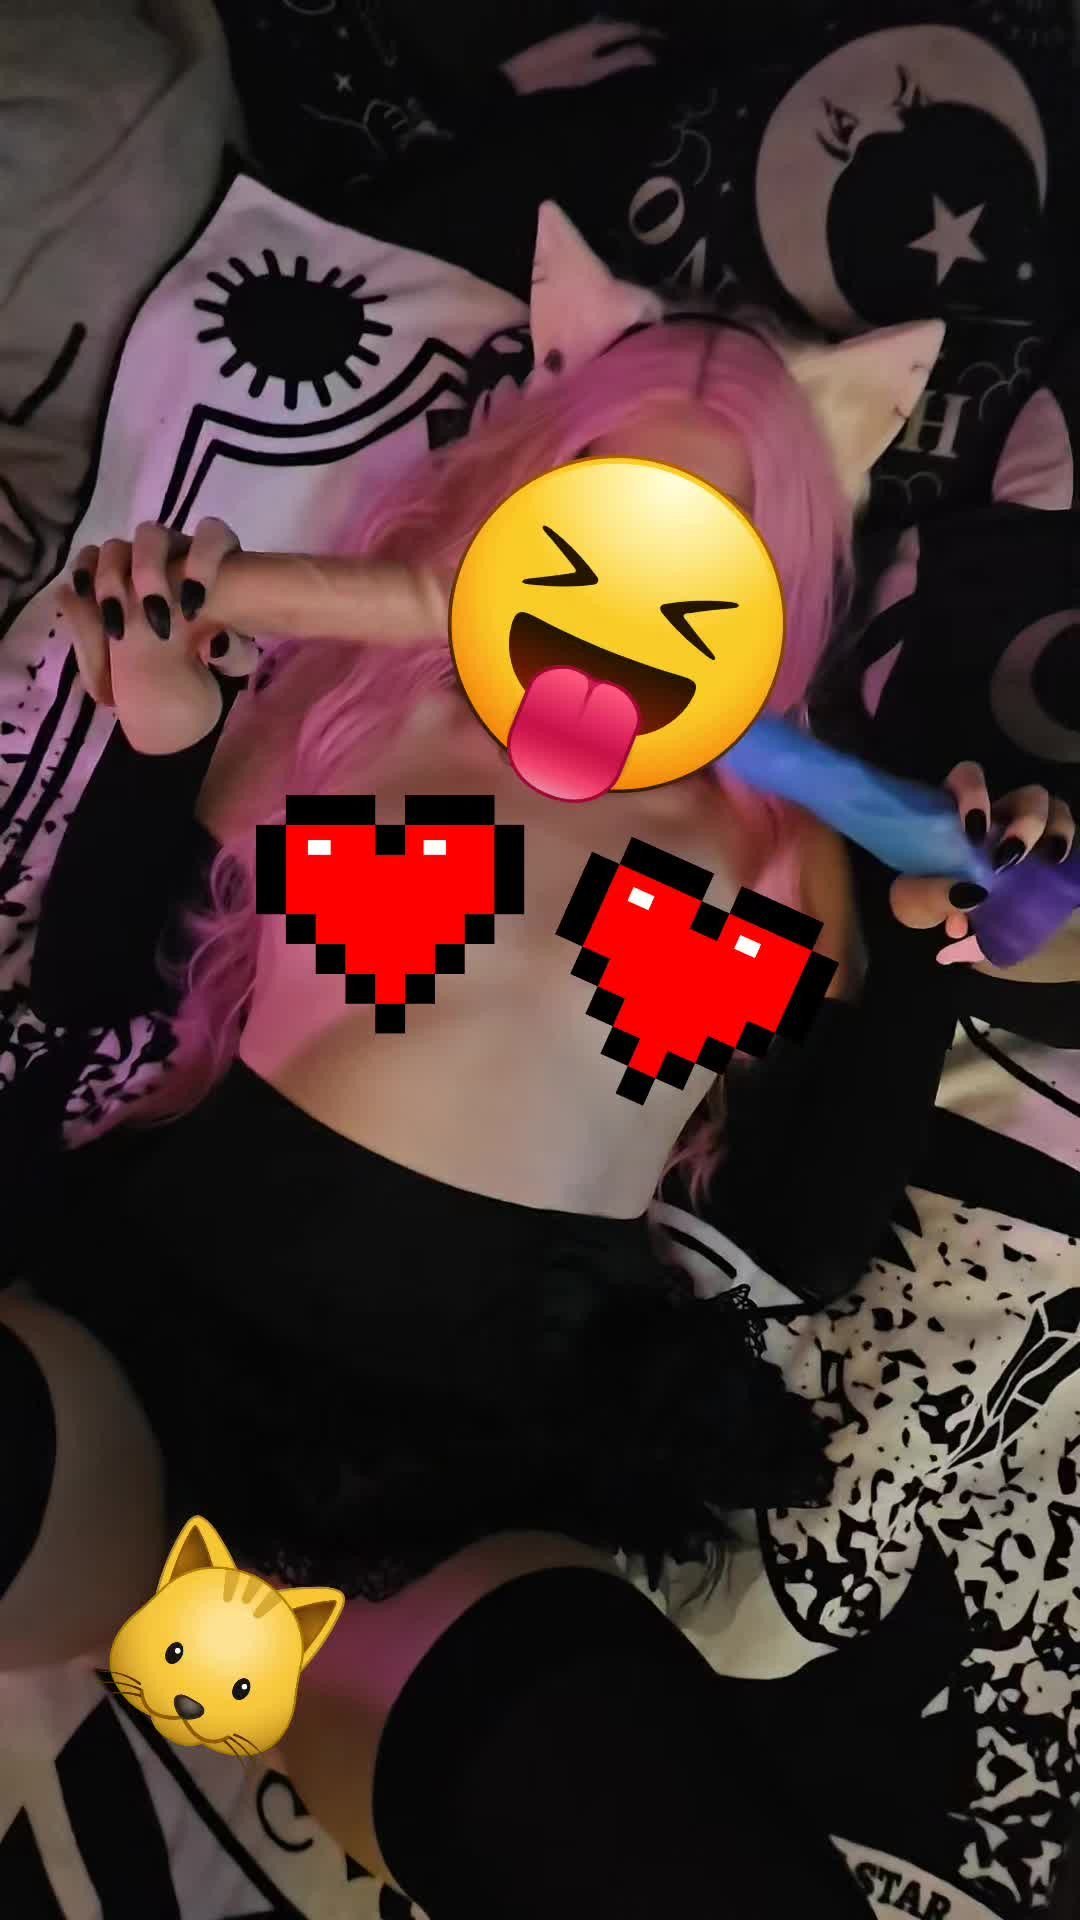 Video by Crotchkitty with the username @Crotchkitty, who is a star user,  November 8, 2023 at 10:36 PM and the text says 'Which should I suck first? I bet yours right? #FYP #neko #e-girl #hot #new #catears #nfsw #bigtoys #blowjob #cosplay
https://fansly.com/crotchkitty/posts'